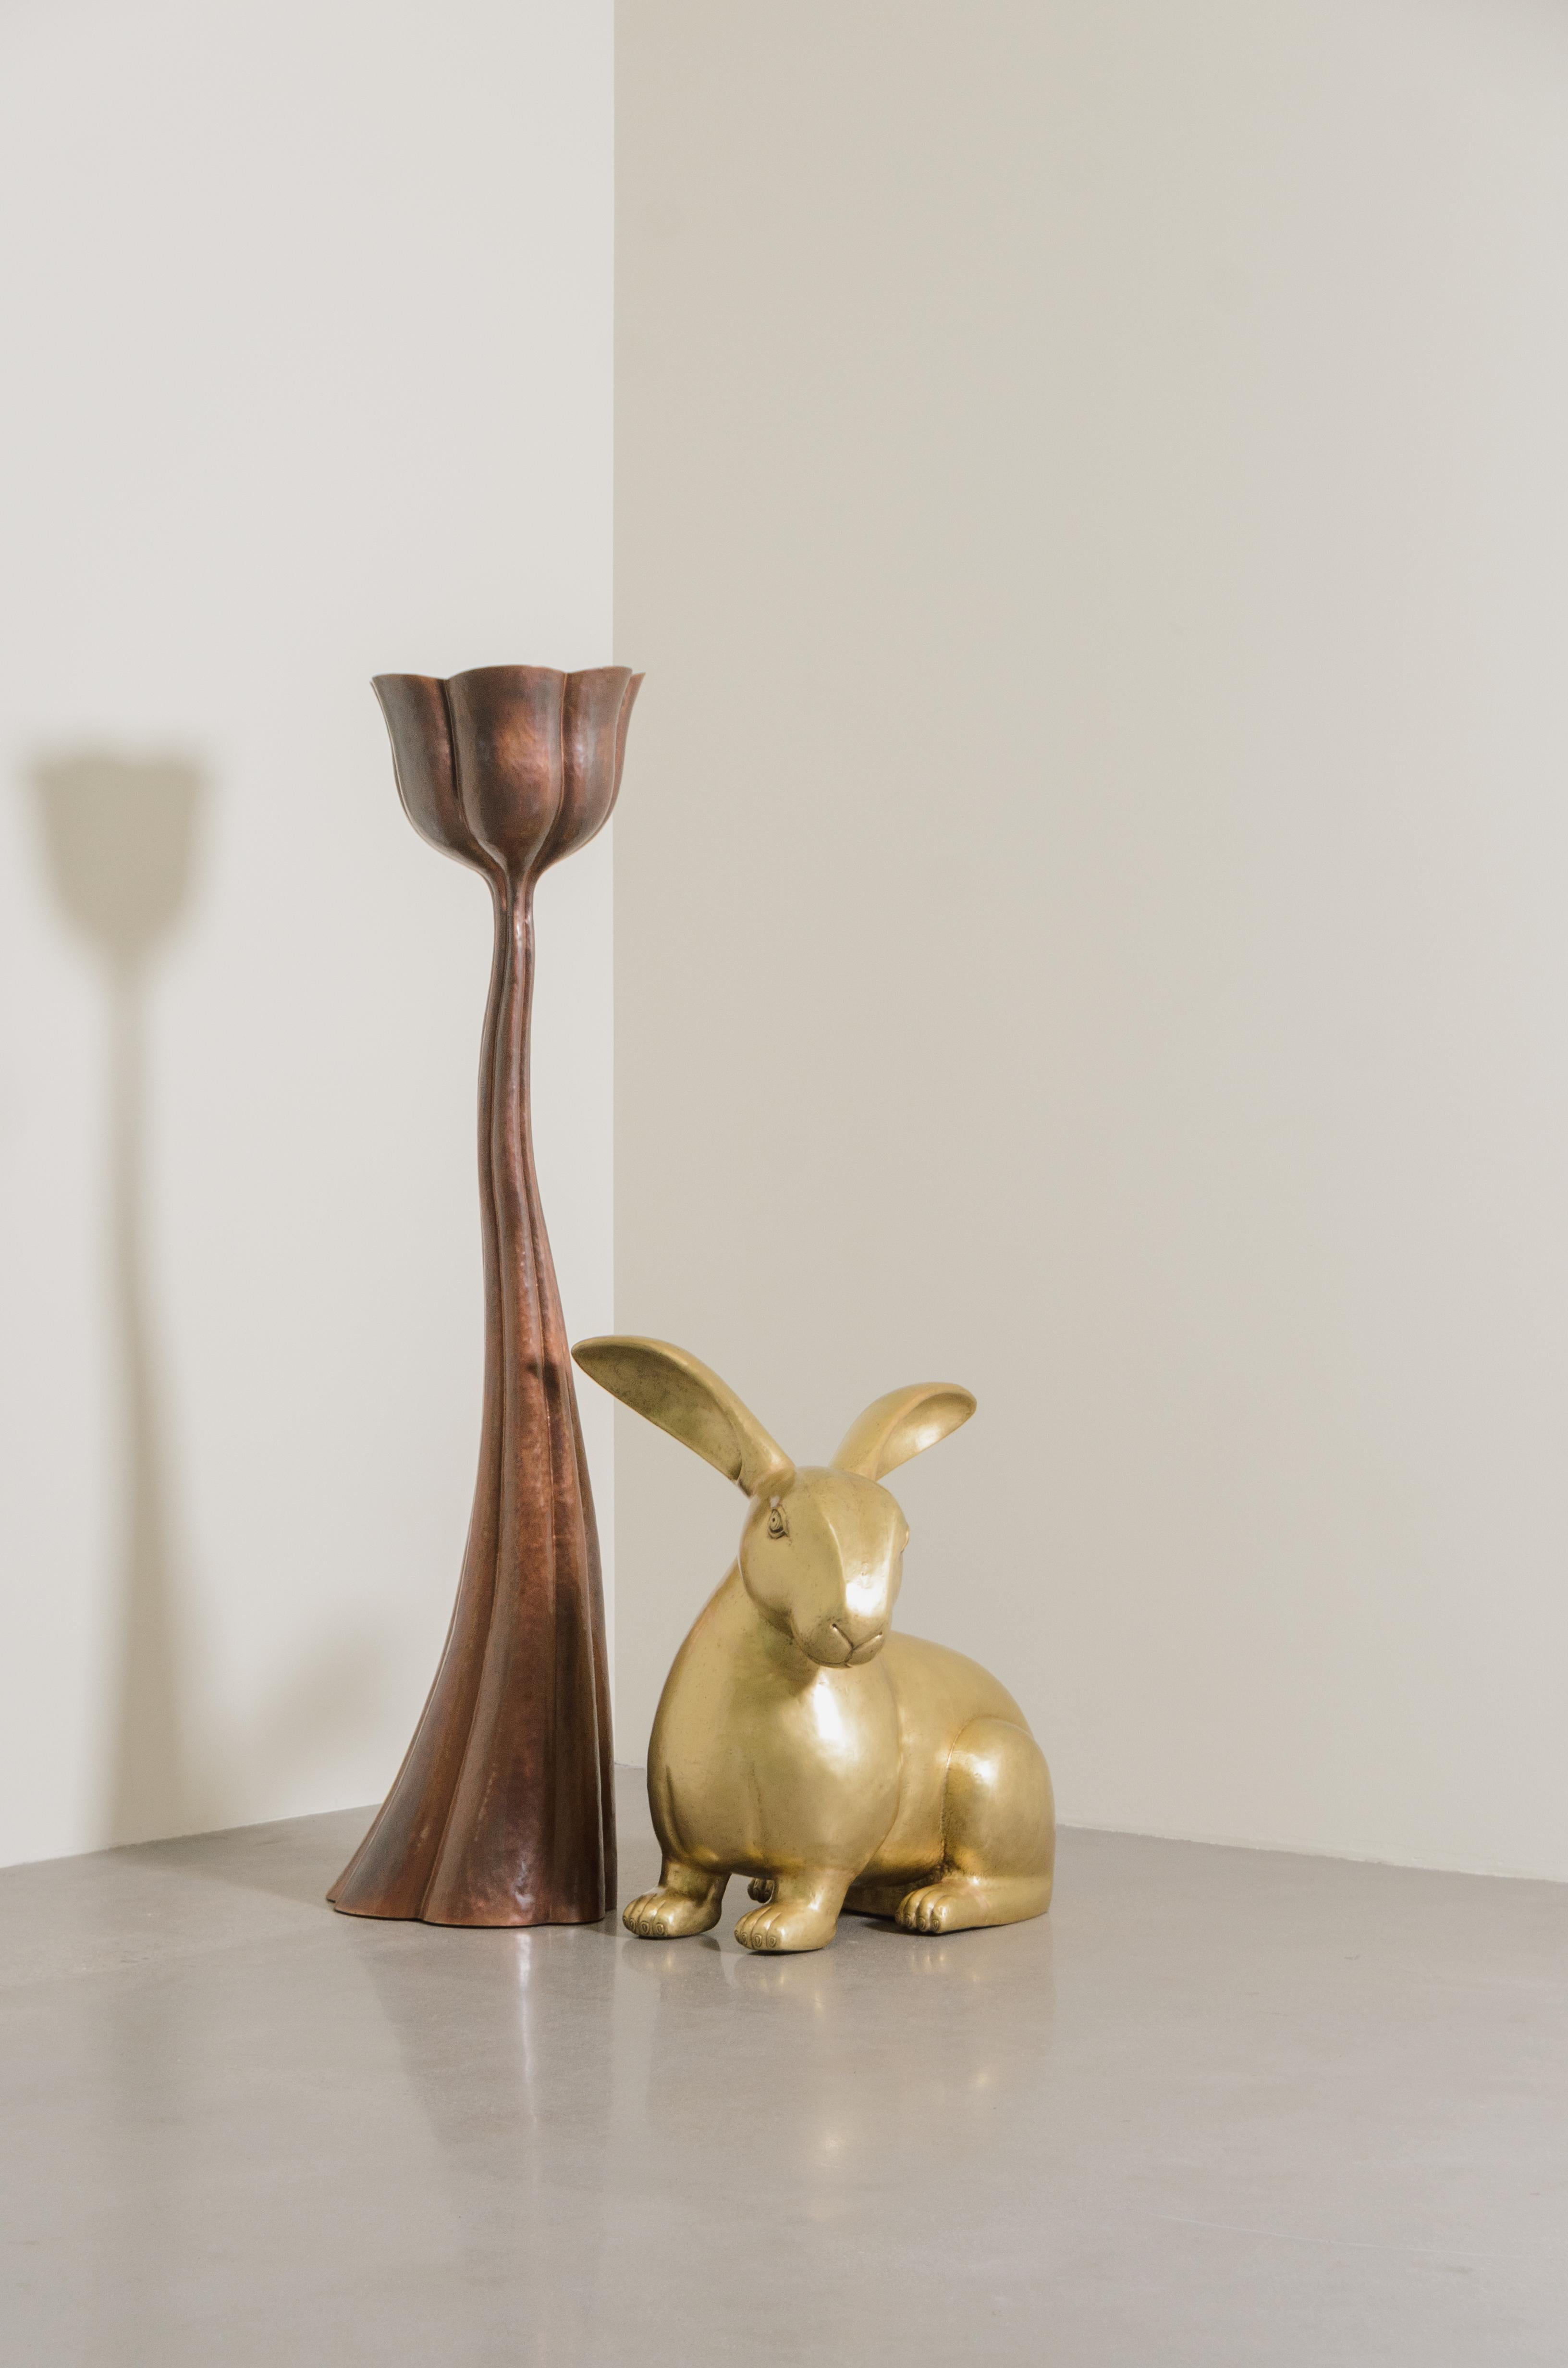 Contemporary Rabbit Sculpture in Brass by Robert Kuo, Hand Repoussé, Limited For Sale 5